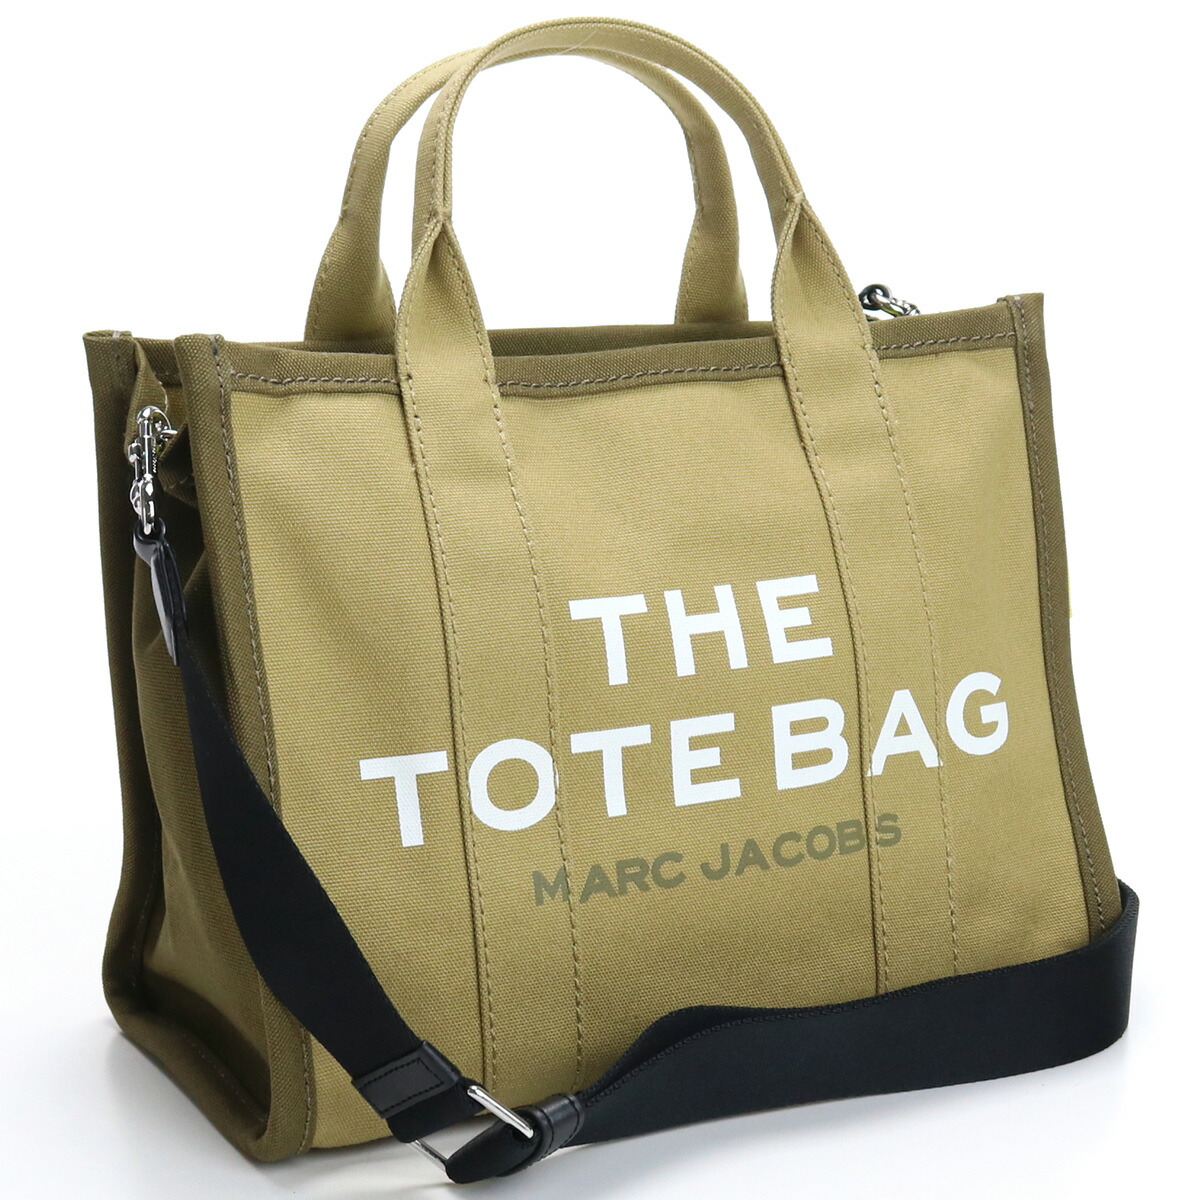 22SS新作 マーク・ジェイコブス MARC JACOBS  トートバッグ ブランドバッグ H063M01RE21　373 THE TOTE SLATE GREEN MULTI カーキ系  bag-01